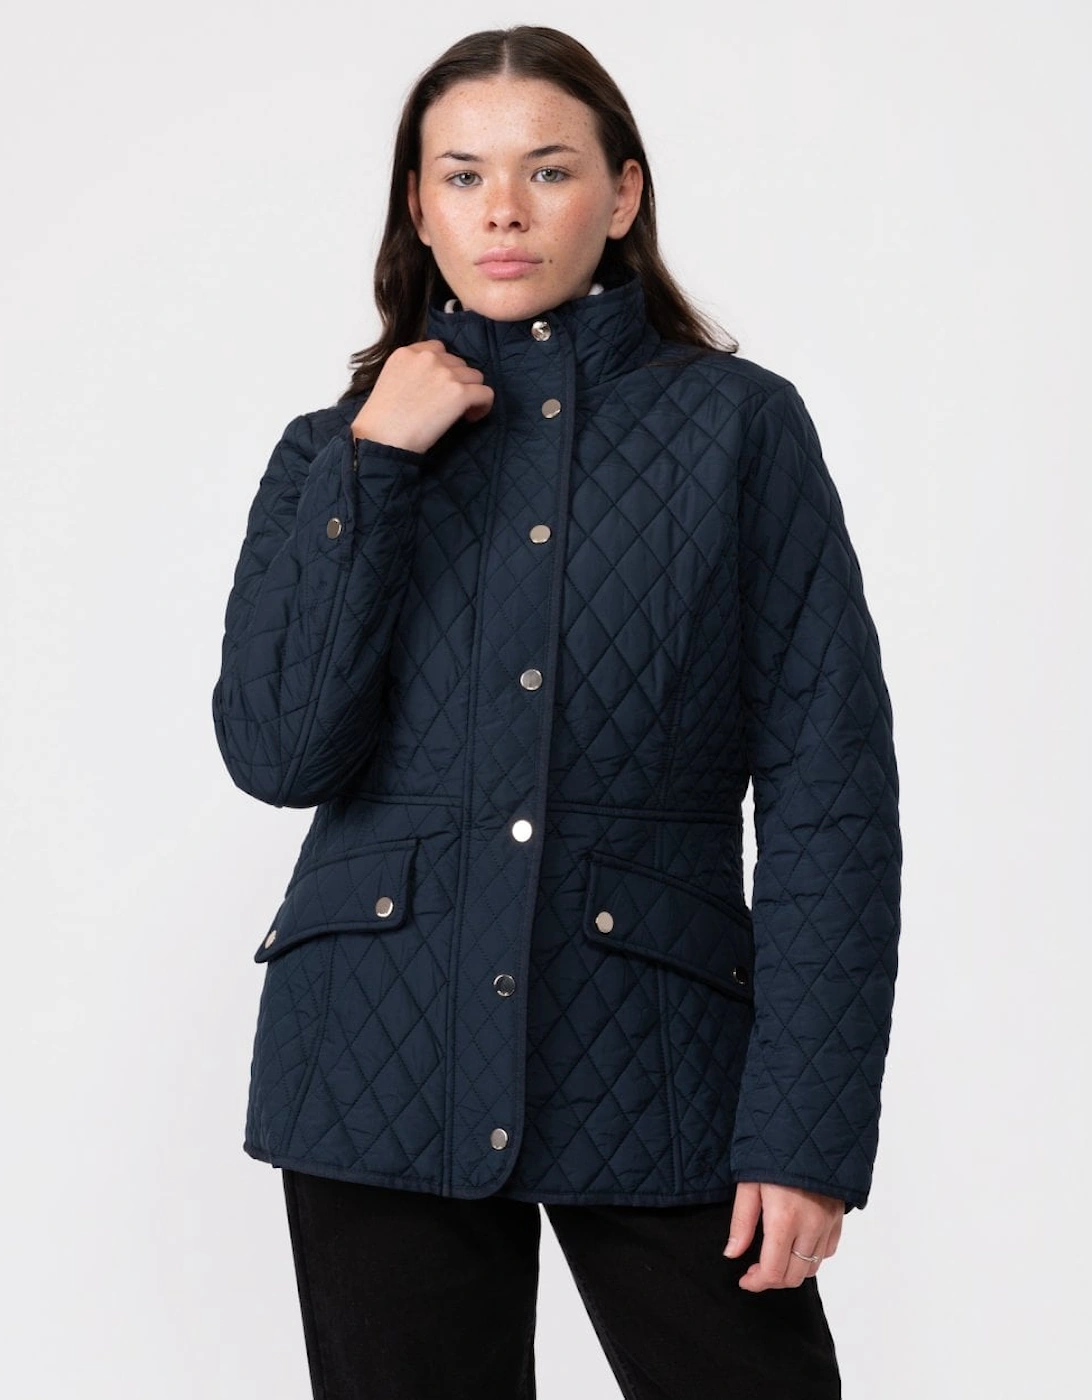 Allendale Womens Diamond Quilted Jacket 222696